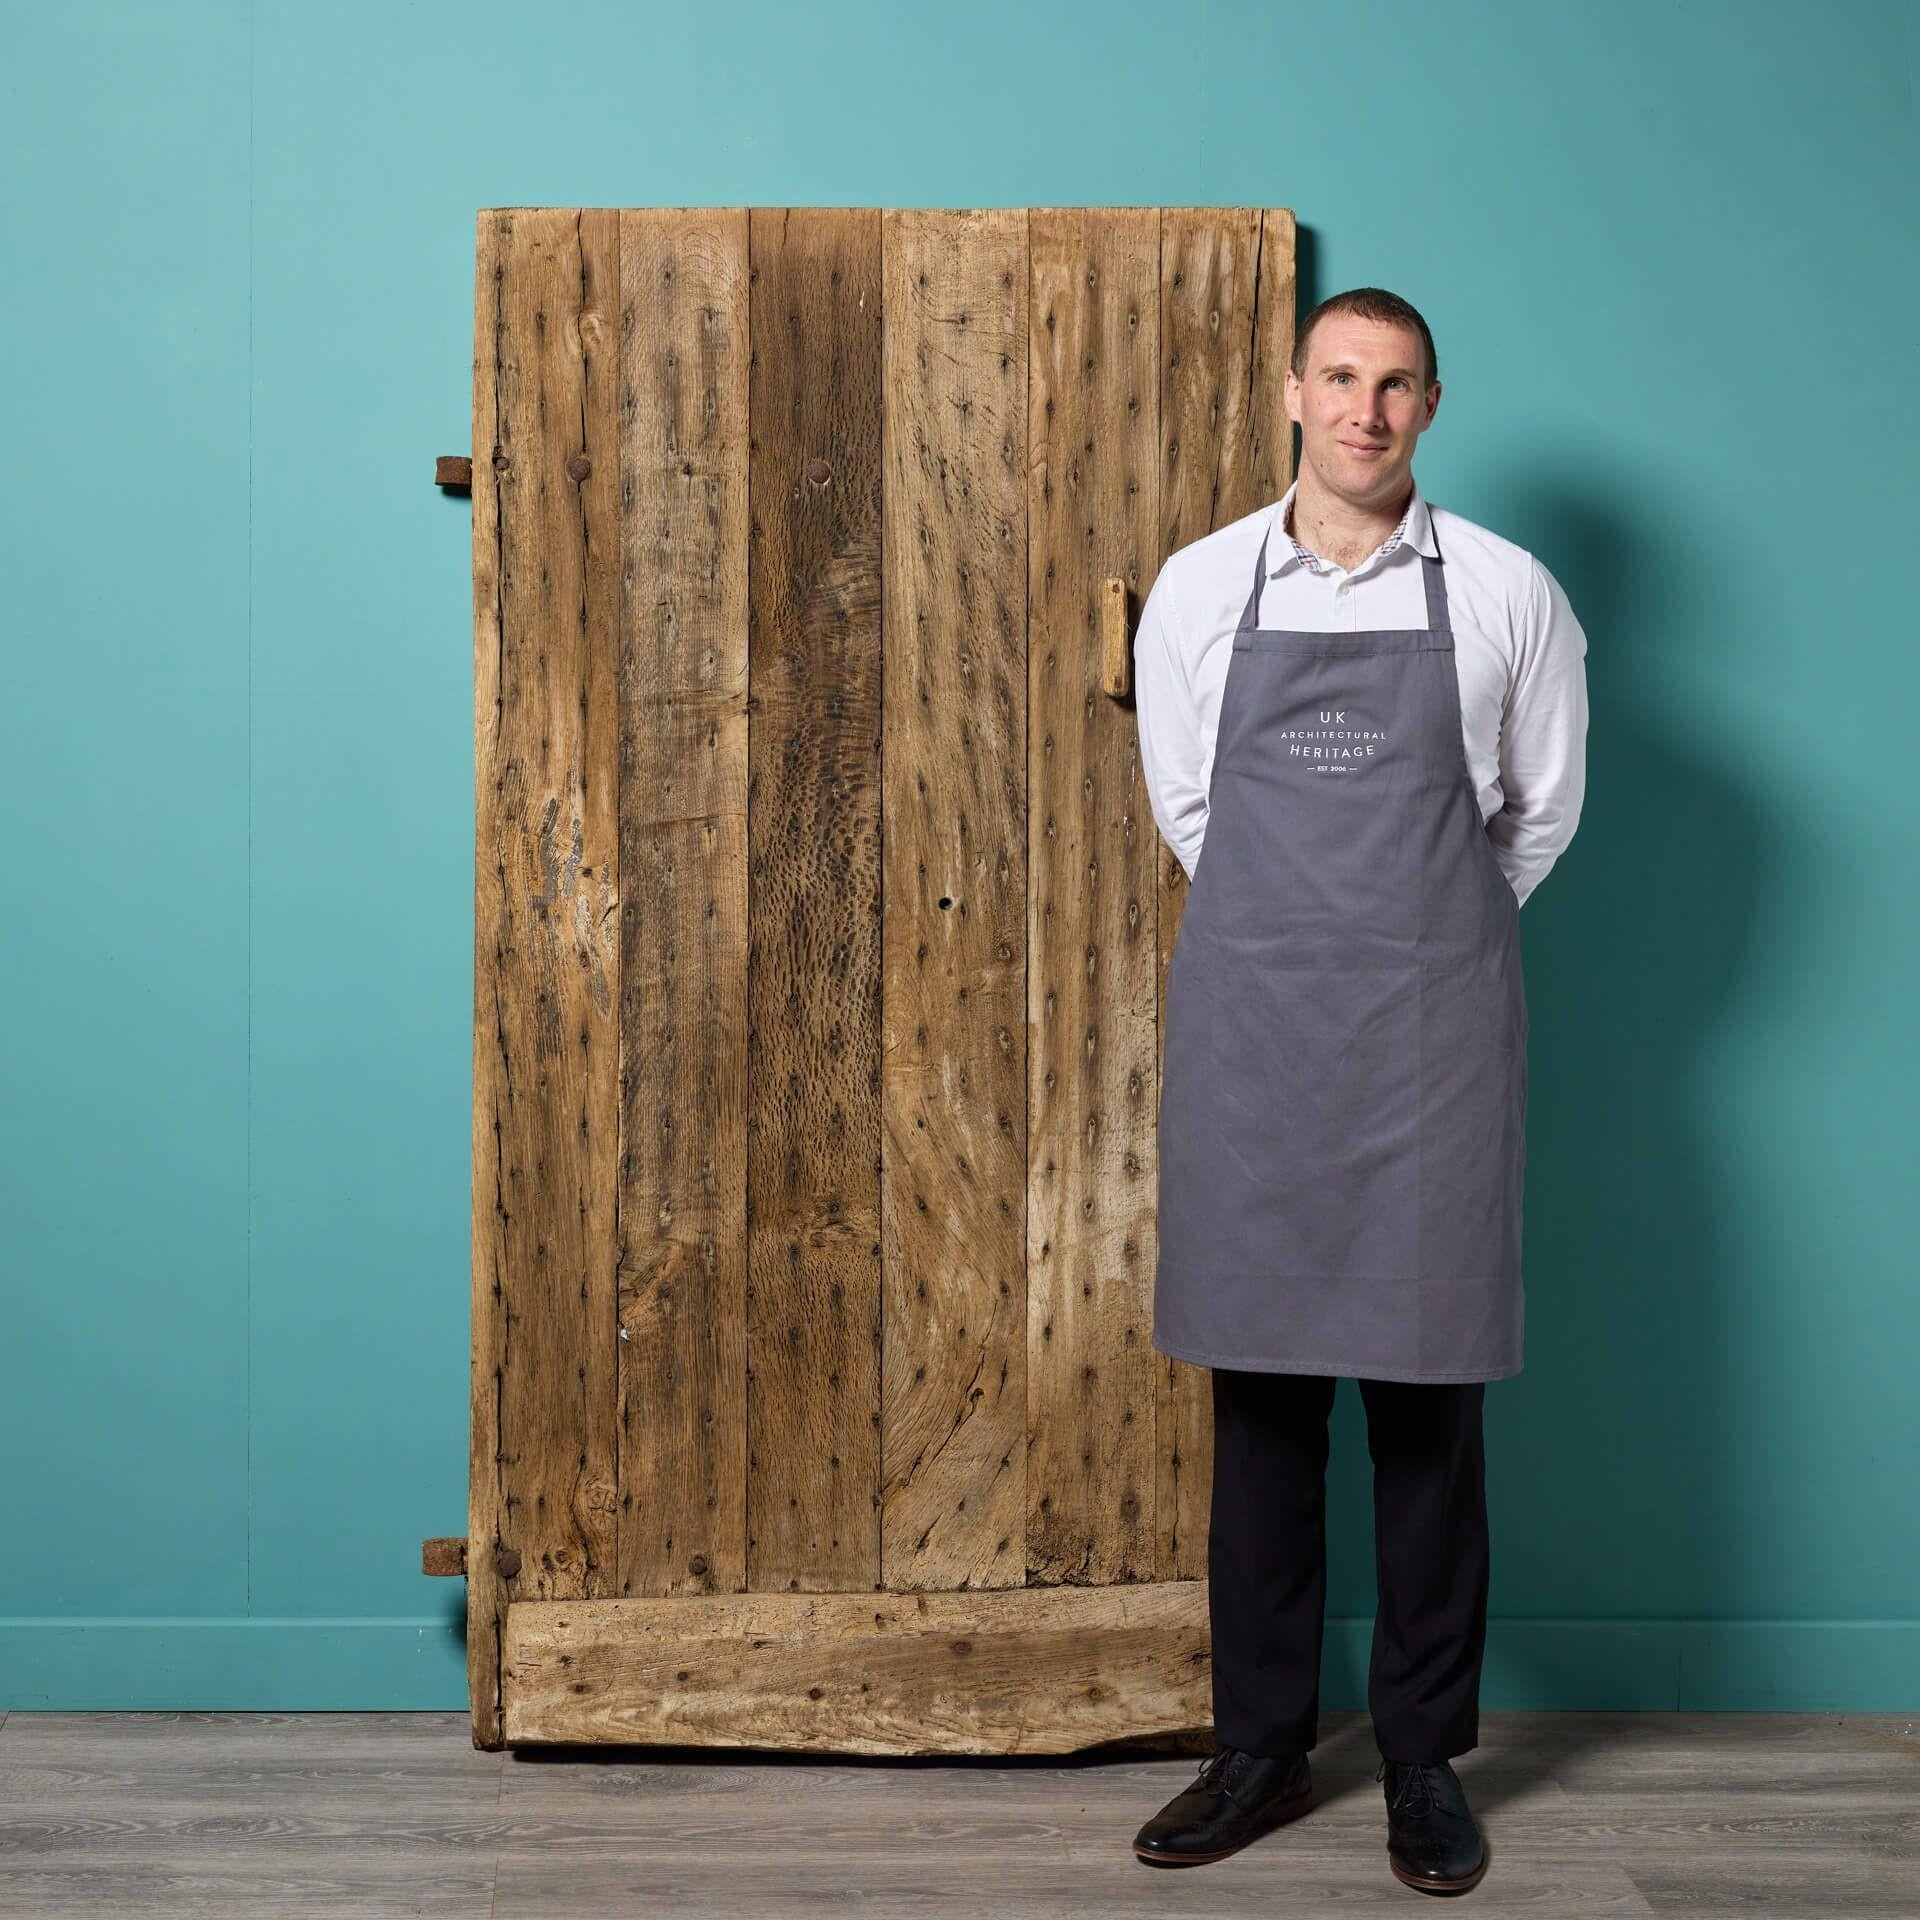 An antique English oak plank door dating back to the 1600s suitable for interior or exterior use. Brimming with character, this reclaimed door tells the story of 17th century craftsmanship. To one side, it is constructed using horizontal planks, the